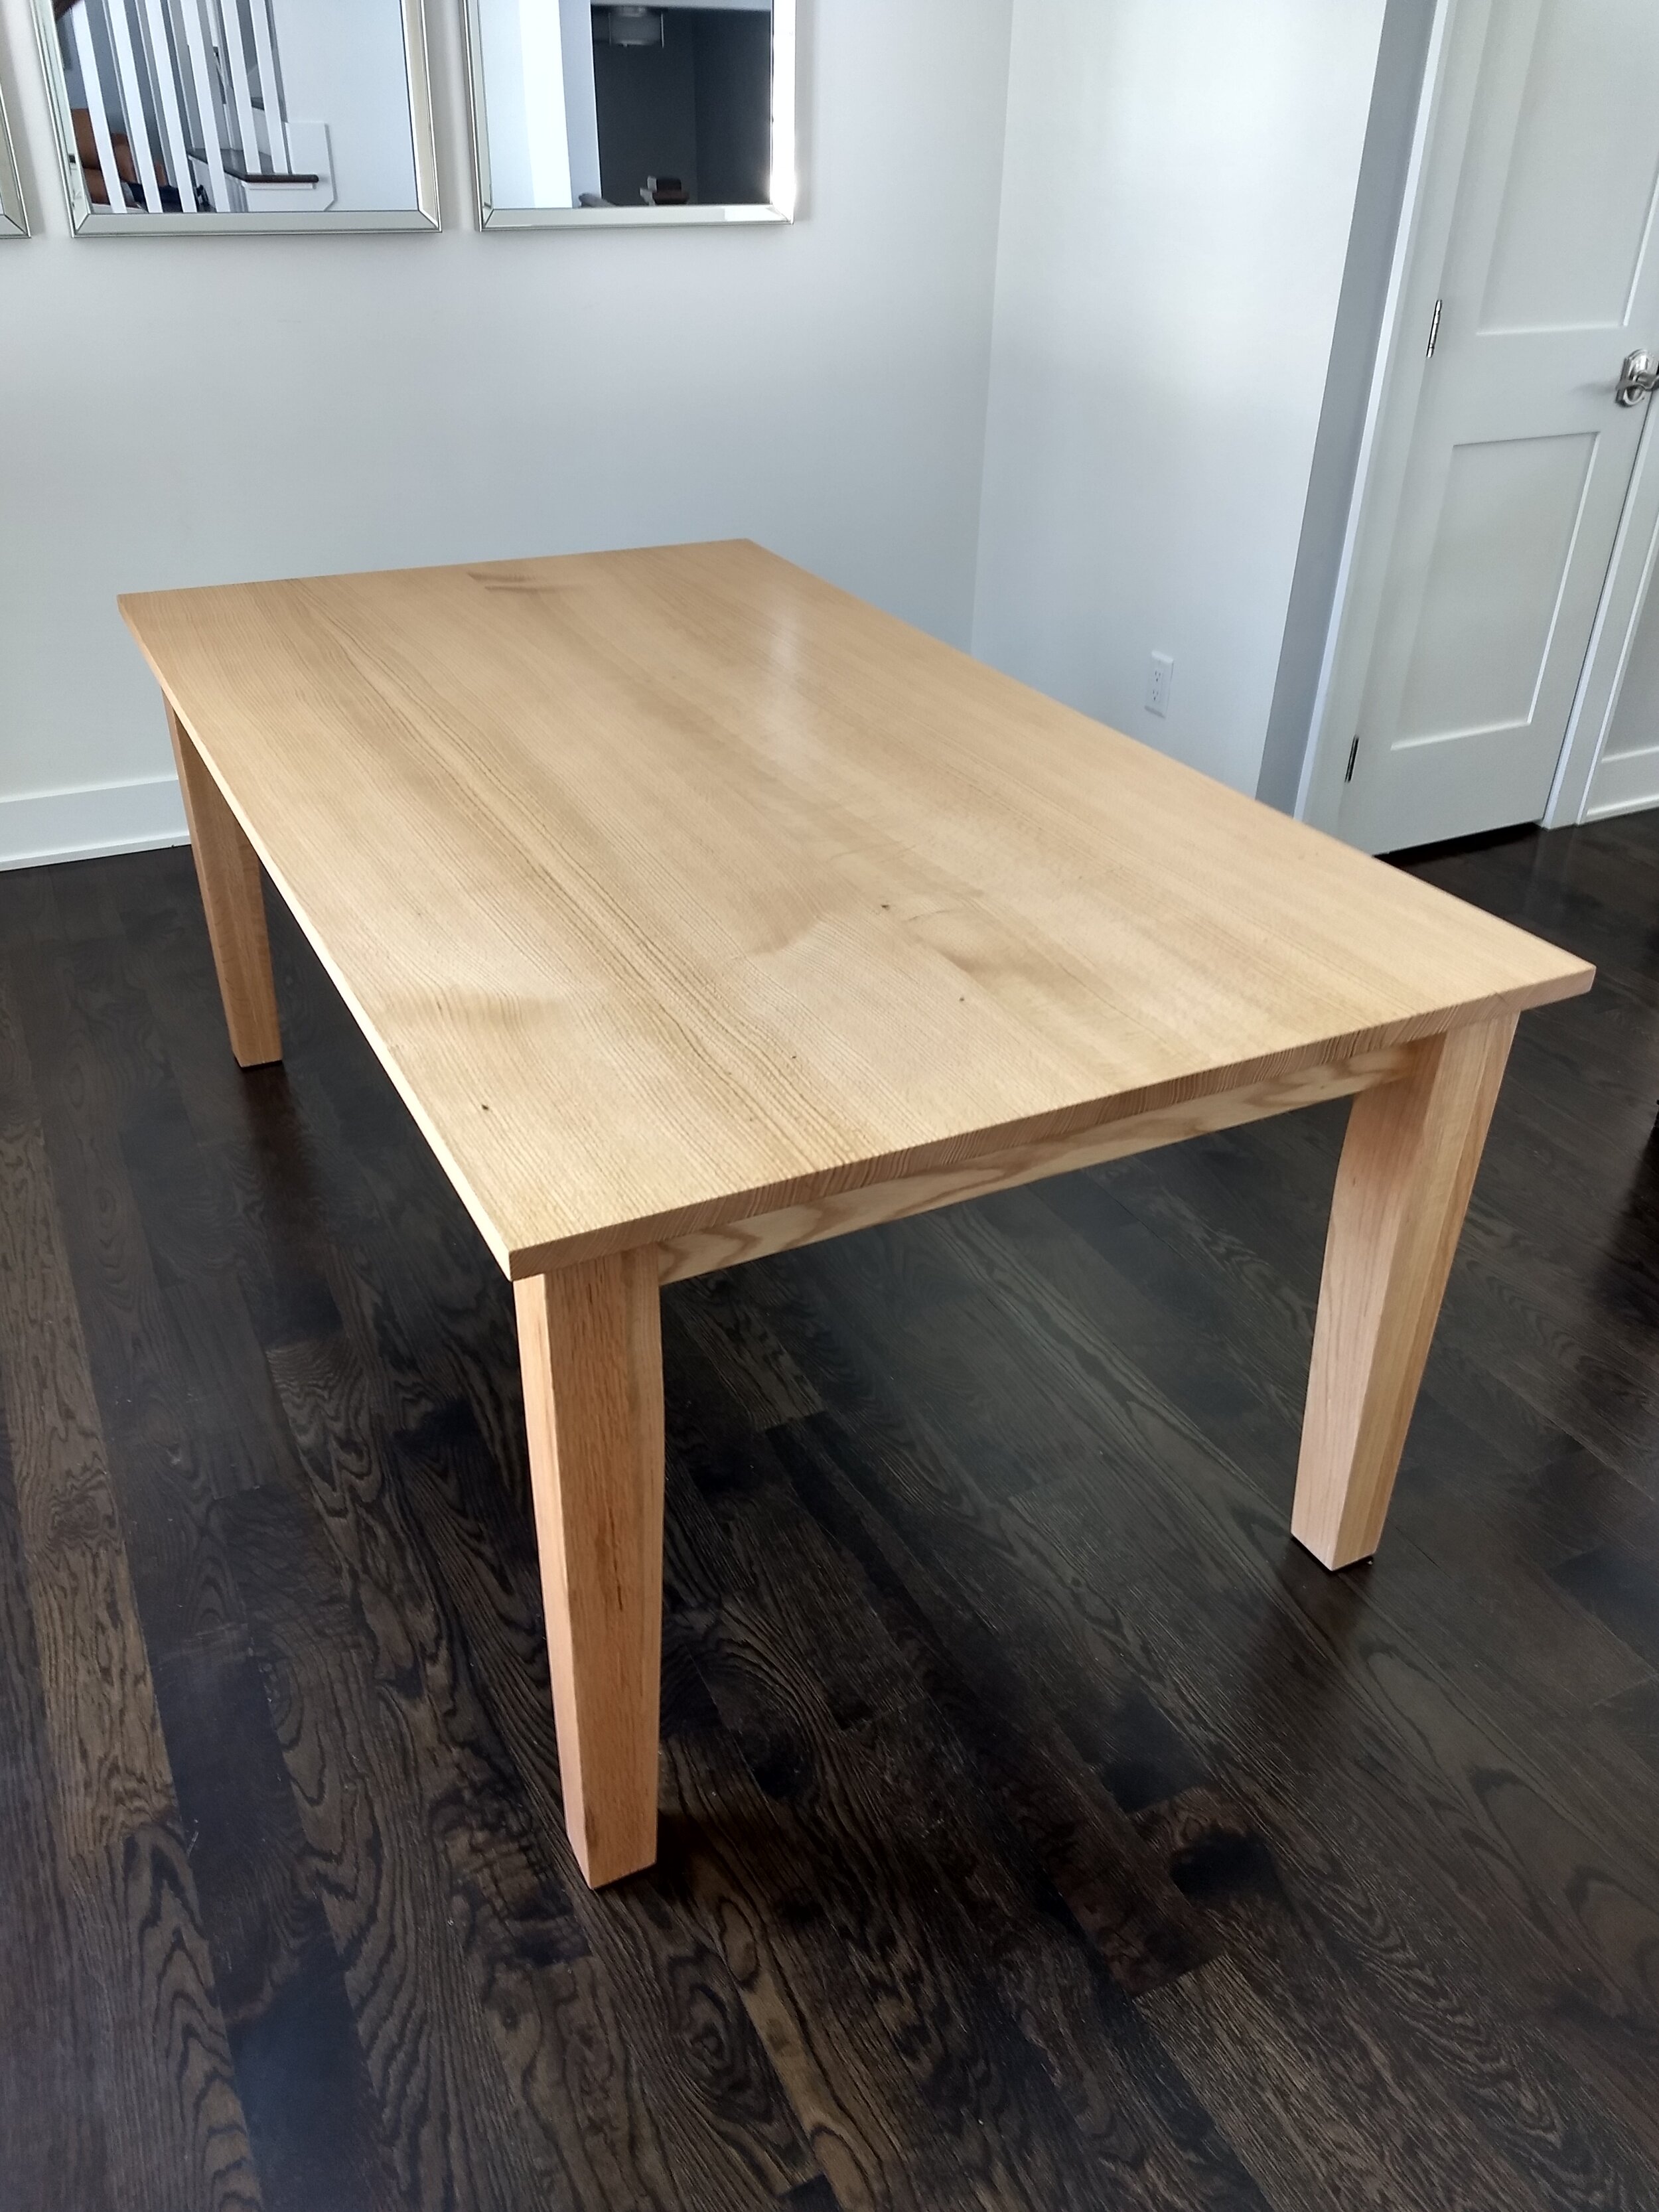 Red Oak Dining Table with Leaves